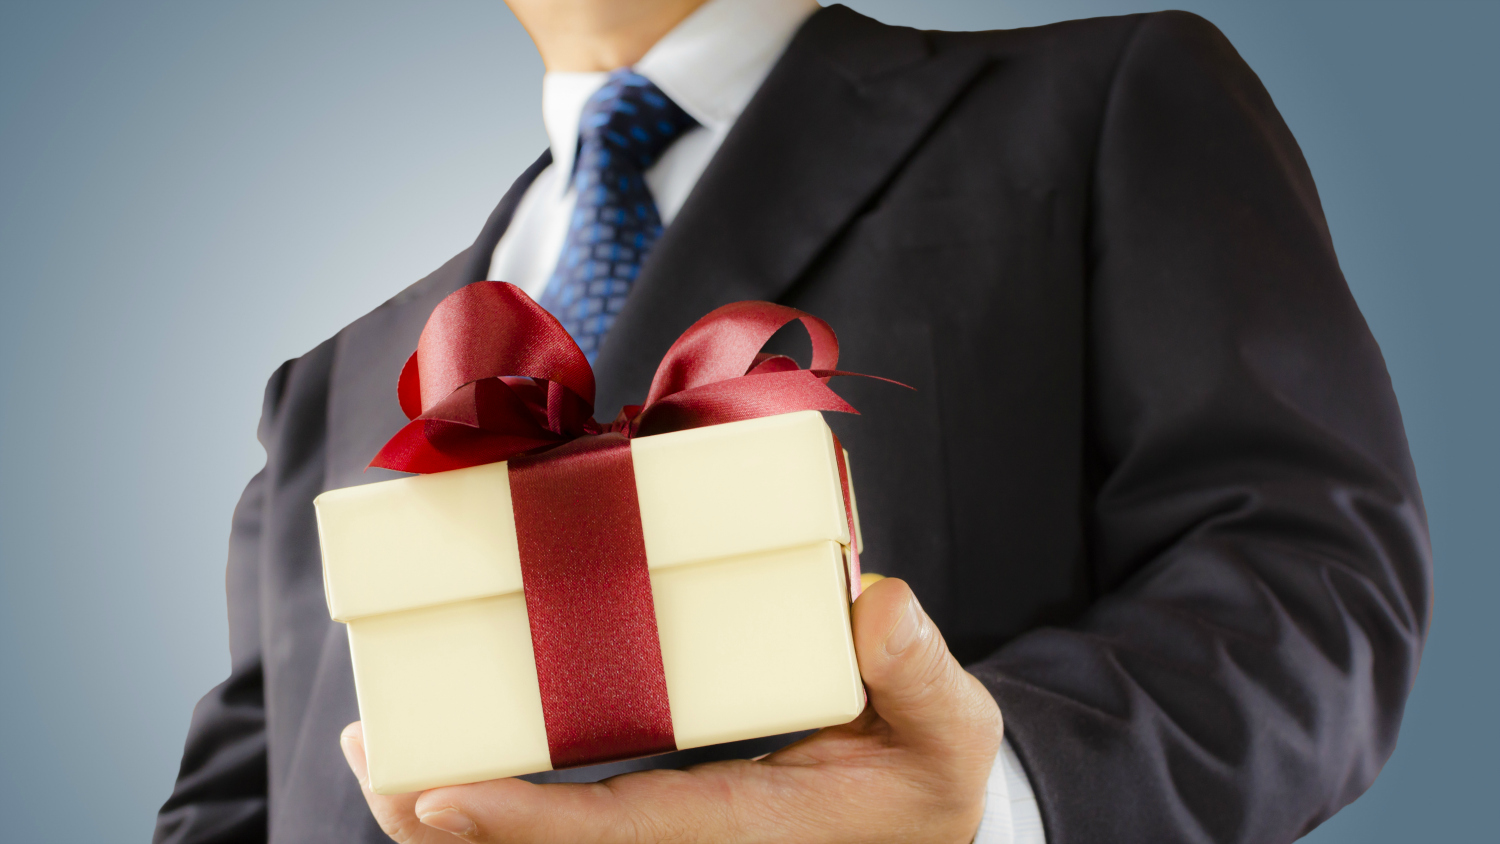 suited man offering gift